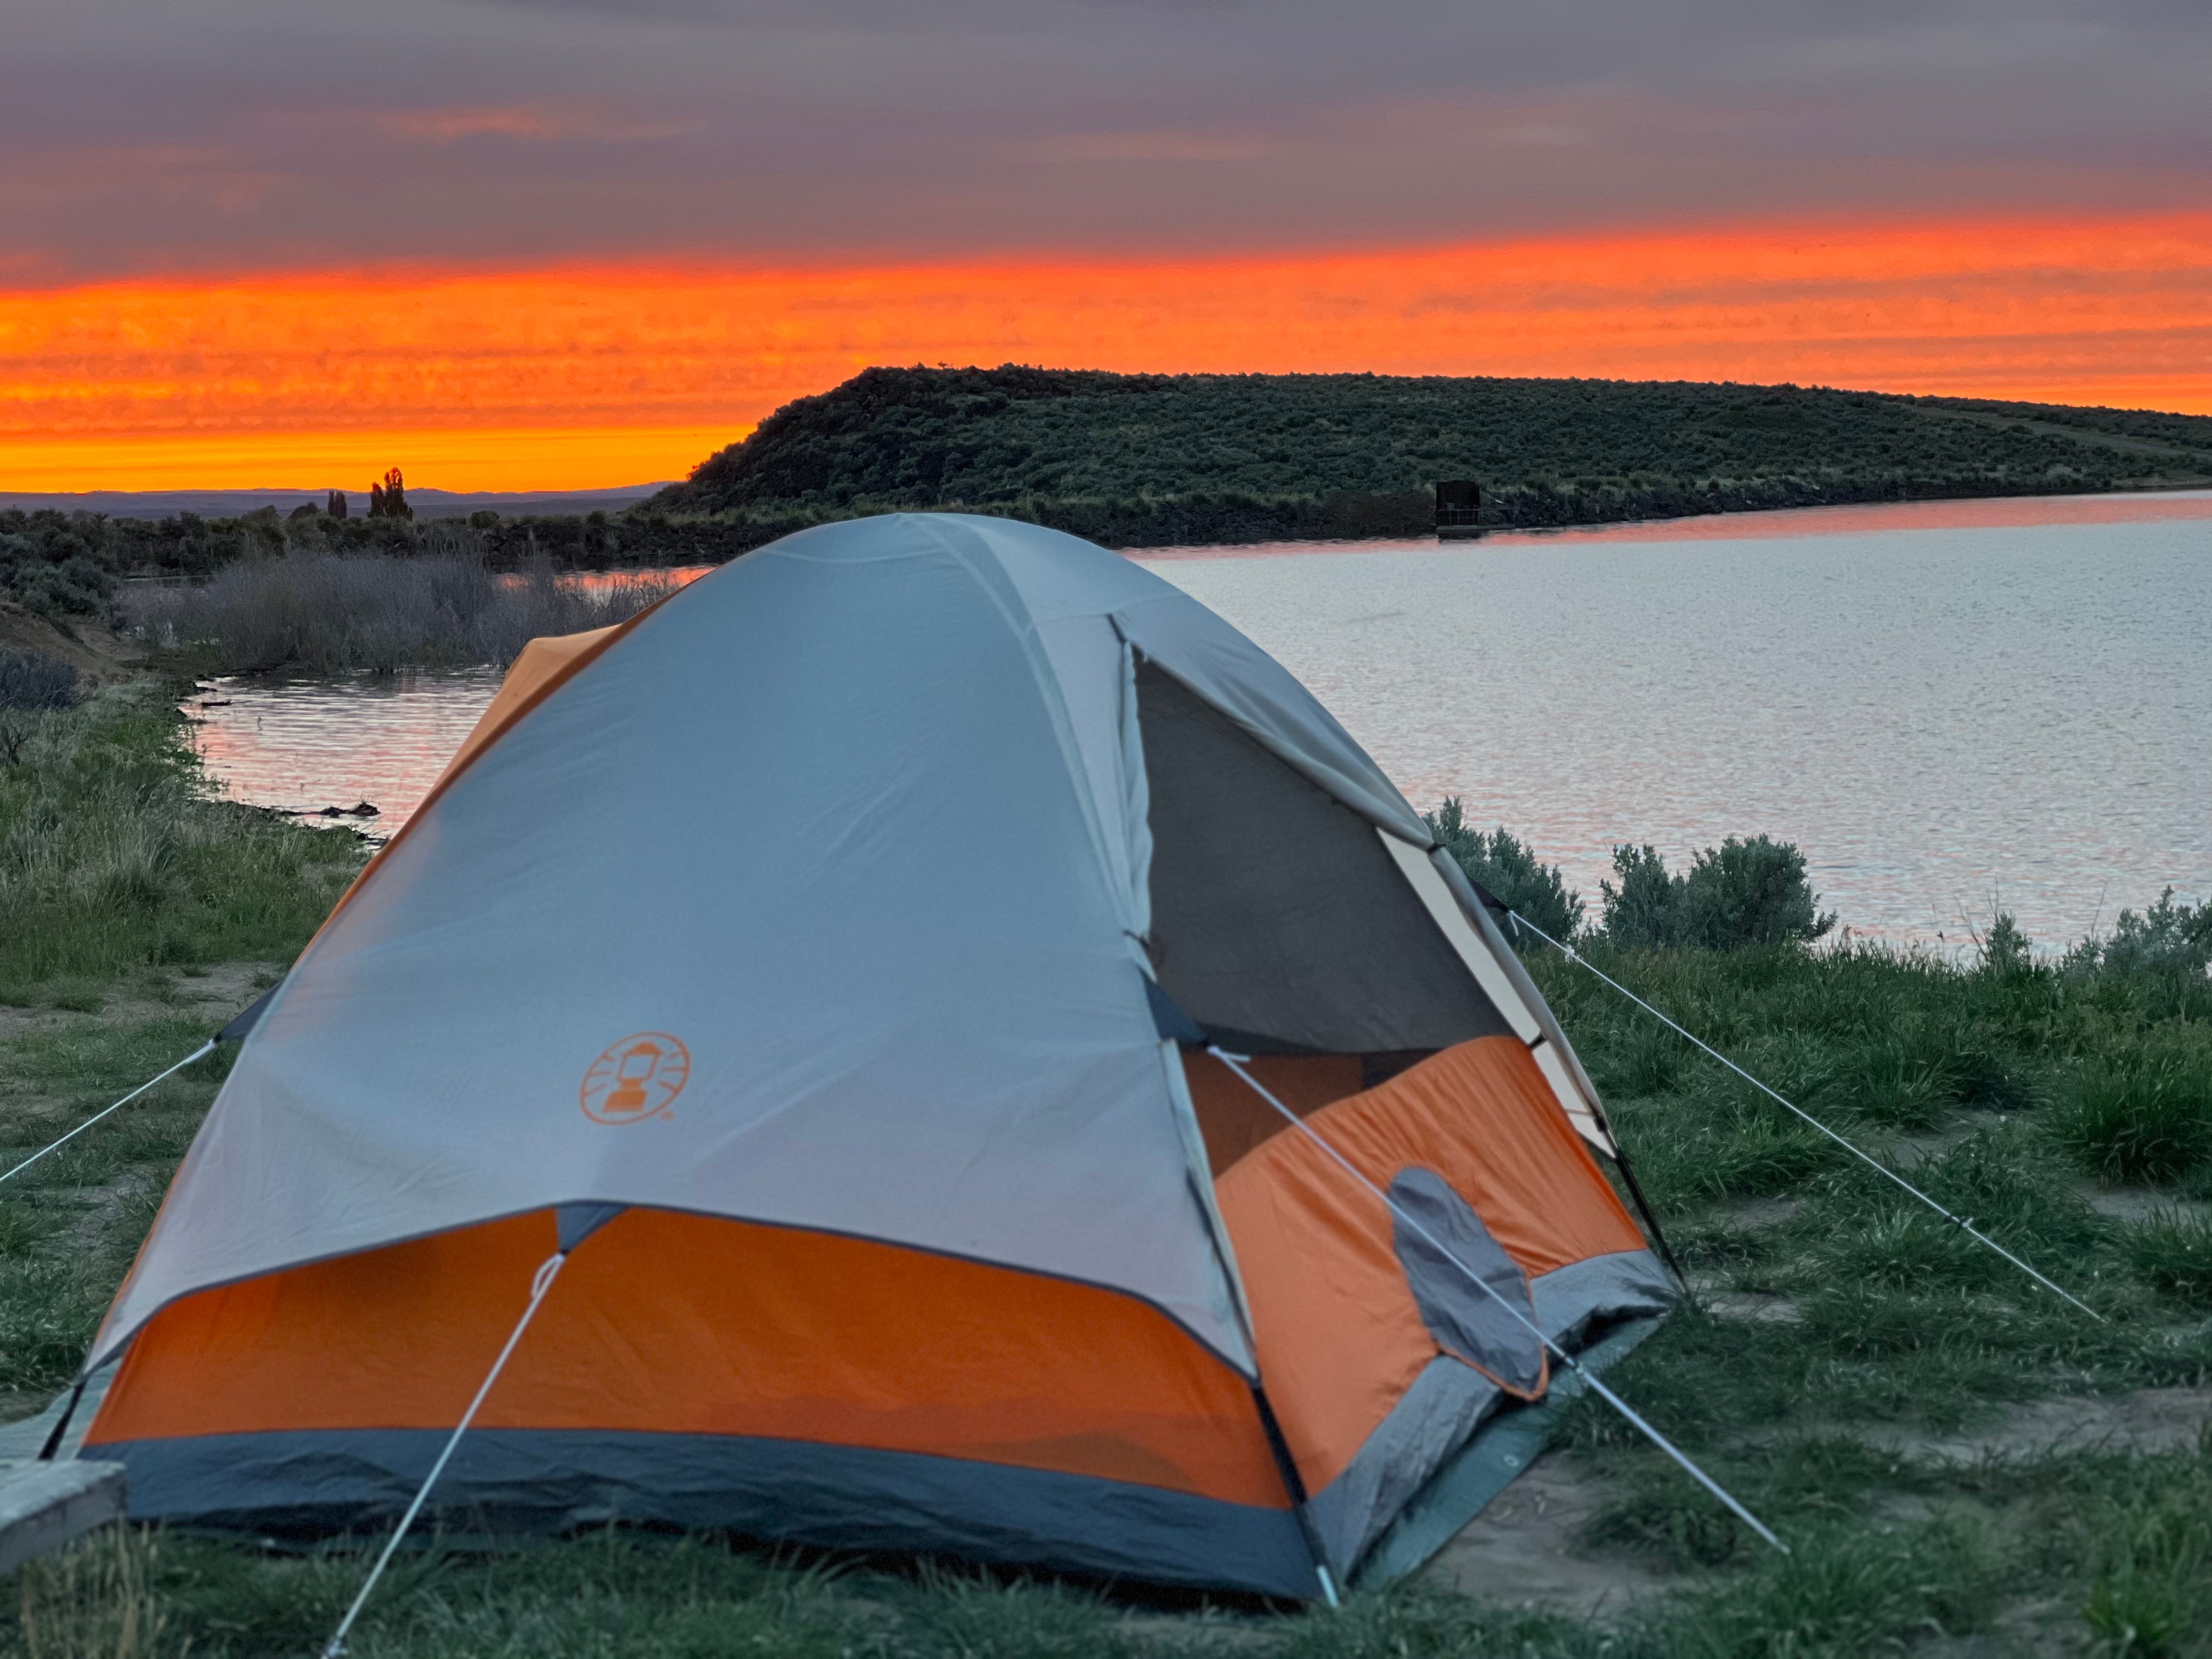 Camper submitted image from Antelope Reservoir - 5